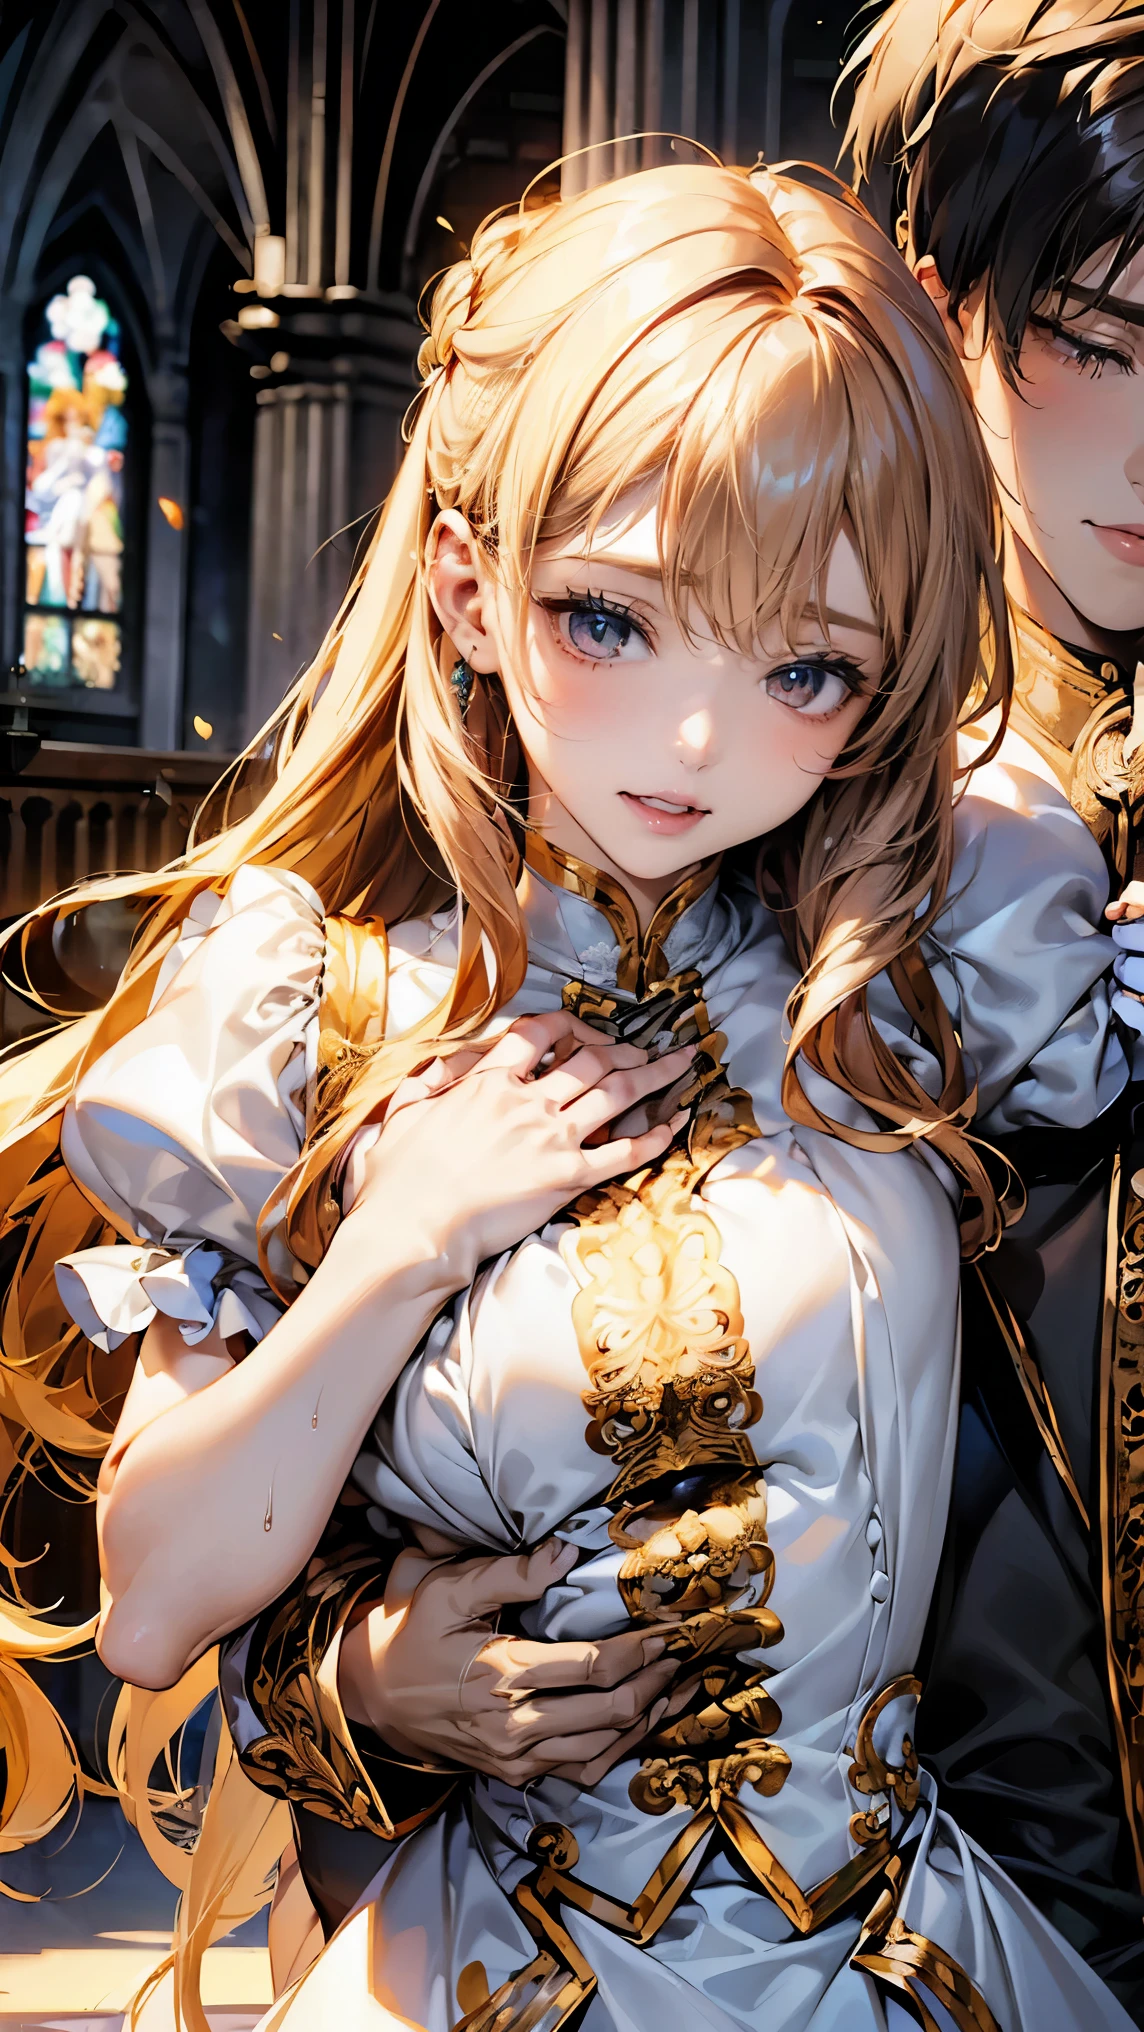 In front of the altar of a majestic church、（blurred background）、brighter light、golden long hair girl、classic white wedding dress、（elegant luster）、（lots of races）、lots of ribbons、((voluminous puff sleeves))、long cuffs with many buttons、golden embroidery、long train、White embroidered gloves、five fingers、(sexual climax), redness of cheeks, ((1 boy, a boy is grabbing girl’s breasts from behind:1.6)), (arms up)